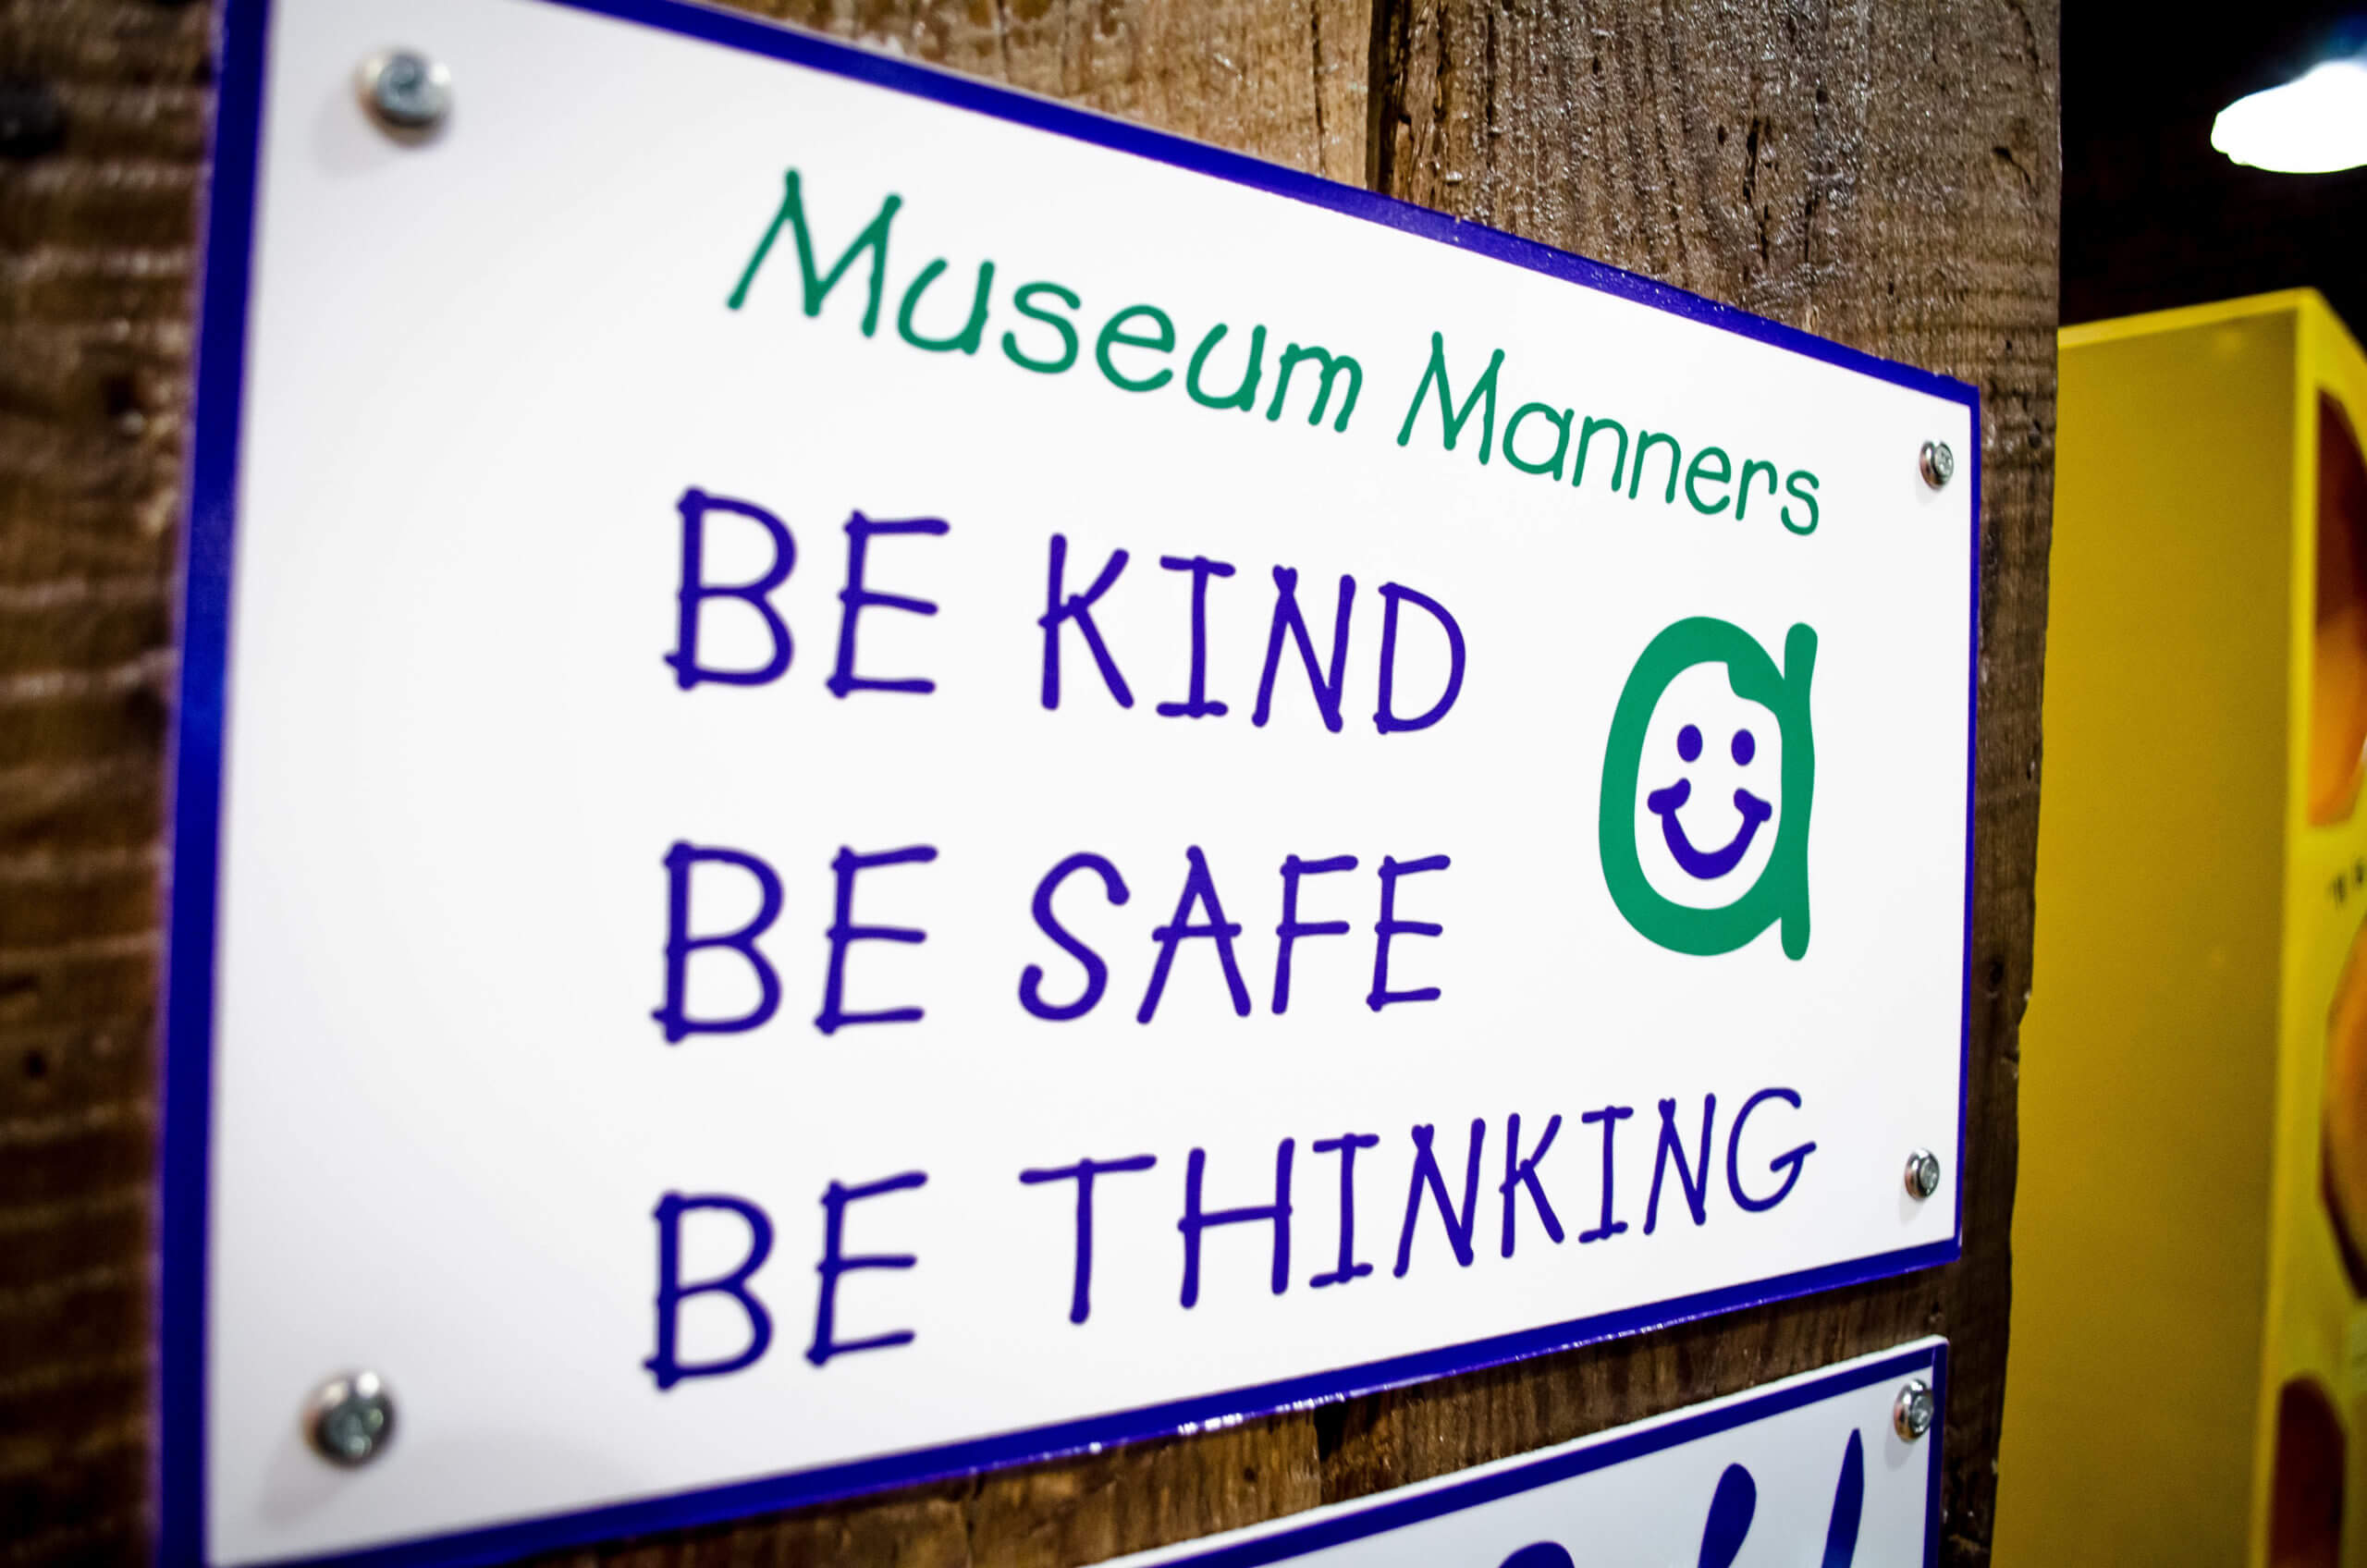 A sign reads "Museum Manners. Be kind. Be safe. Be thinking."